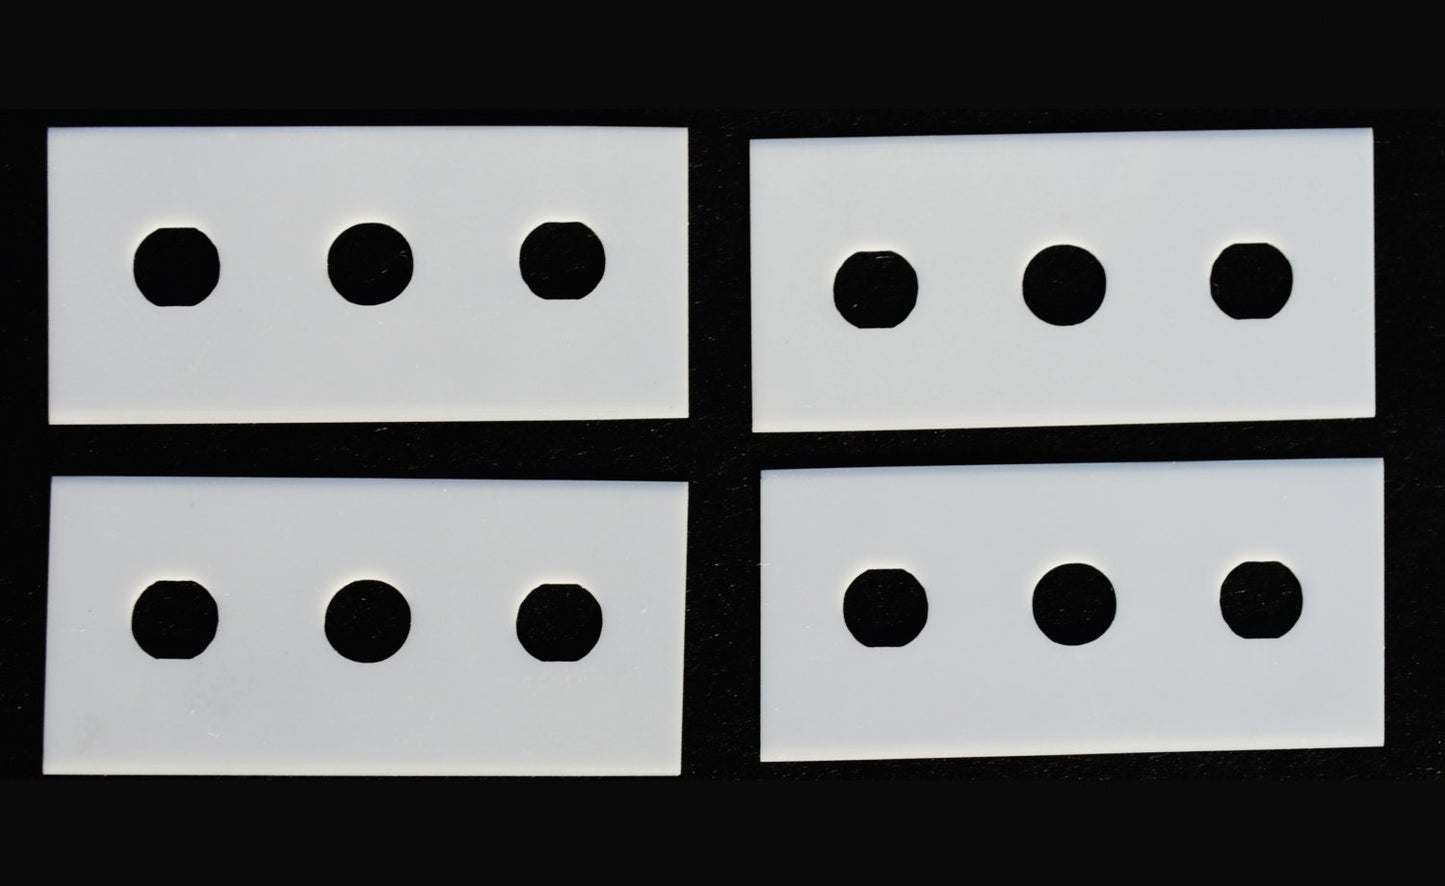 43mm x 22mm CERAMIC 3-hole Slitter Blade (.3mm thick) “3-hole slitters” - double edged